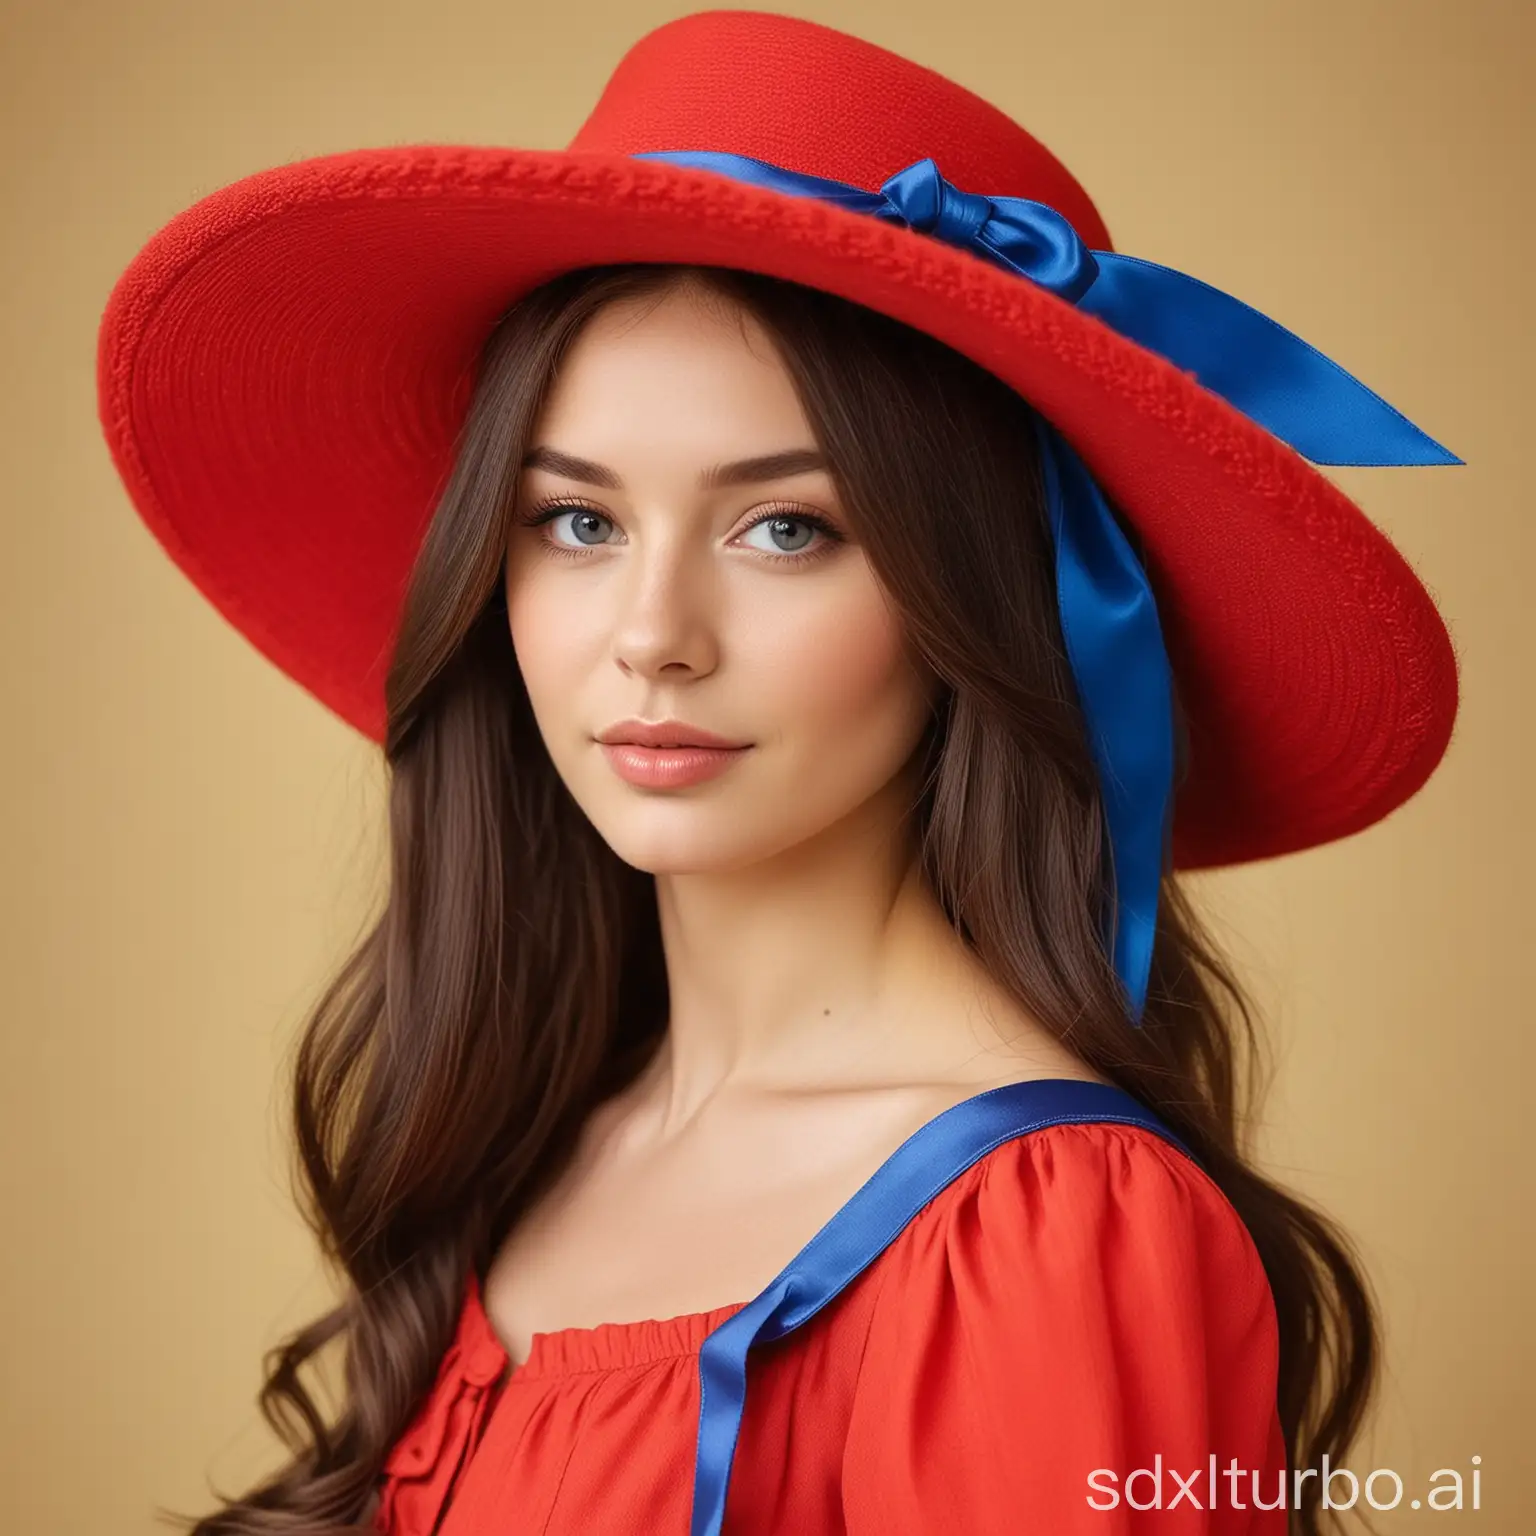 Elegant-Woman-in-Red-Dress-and-Stylish-Hat-with-Natural-Beauty